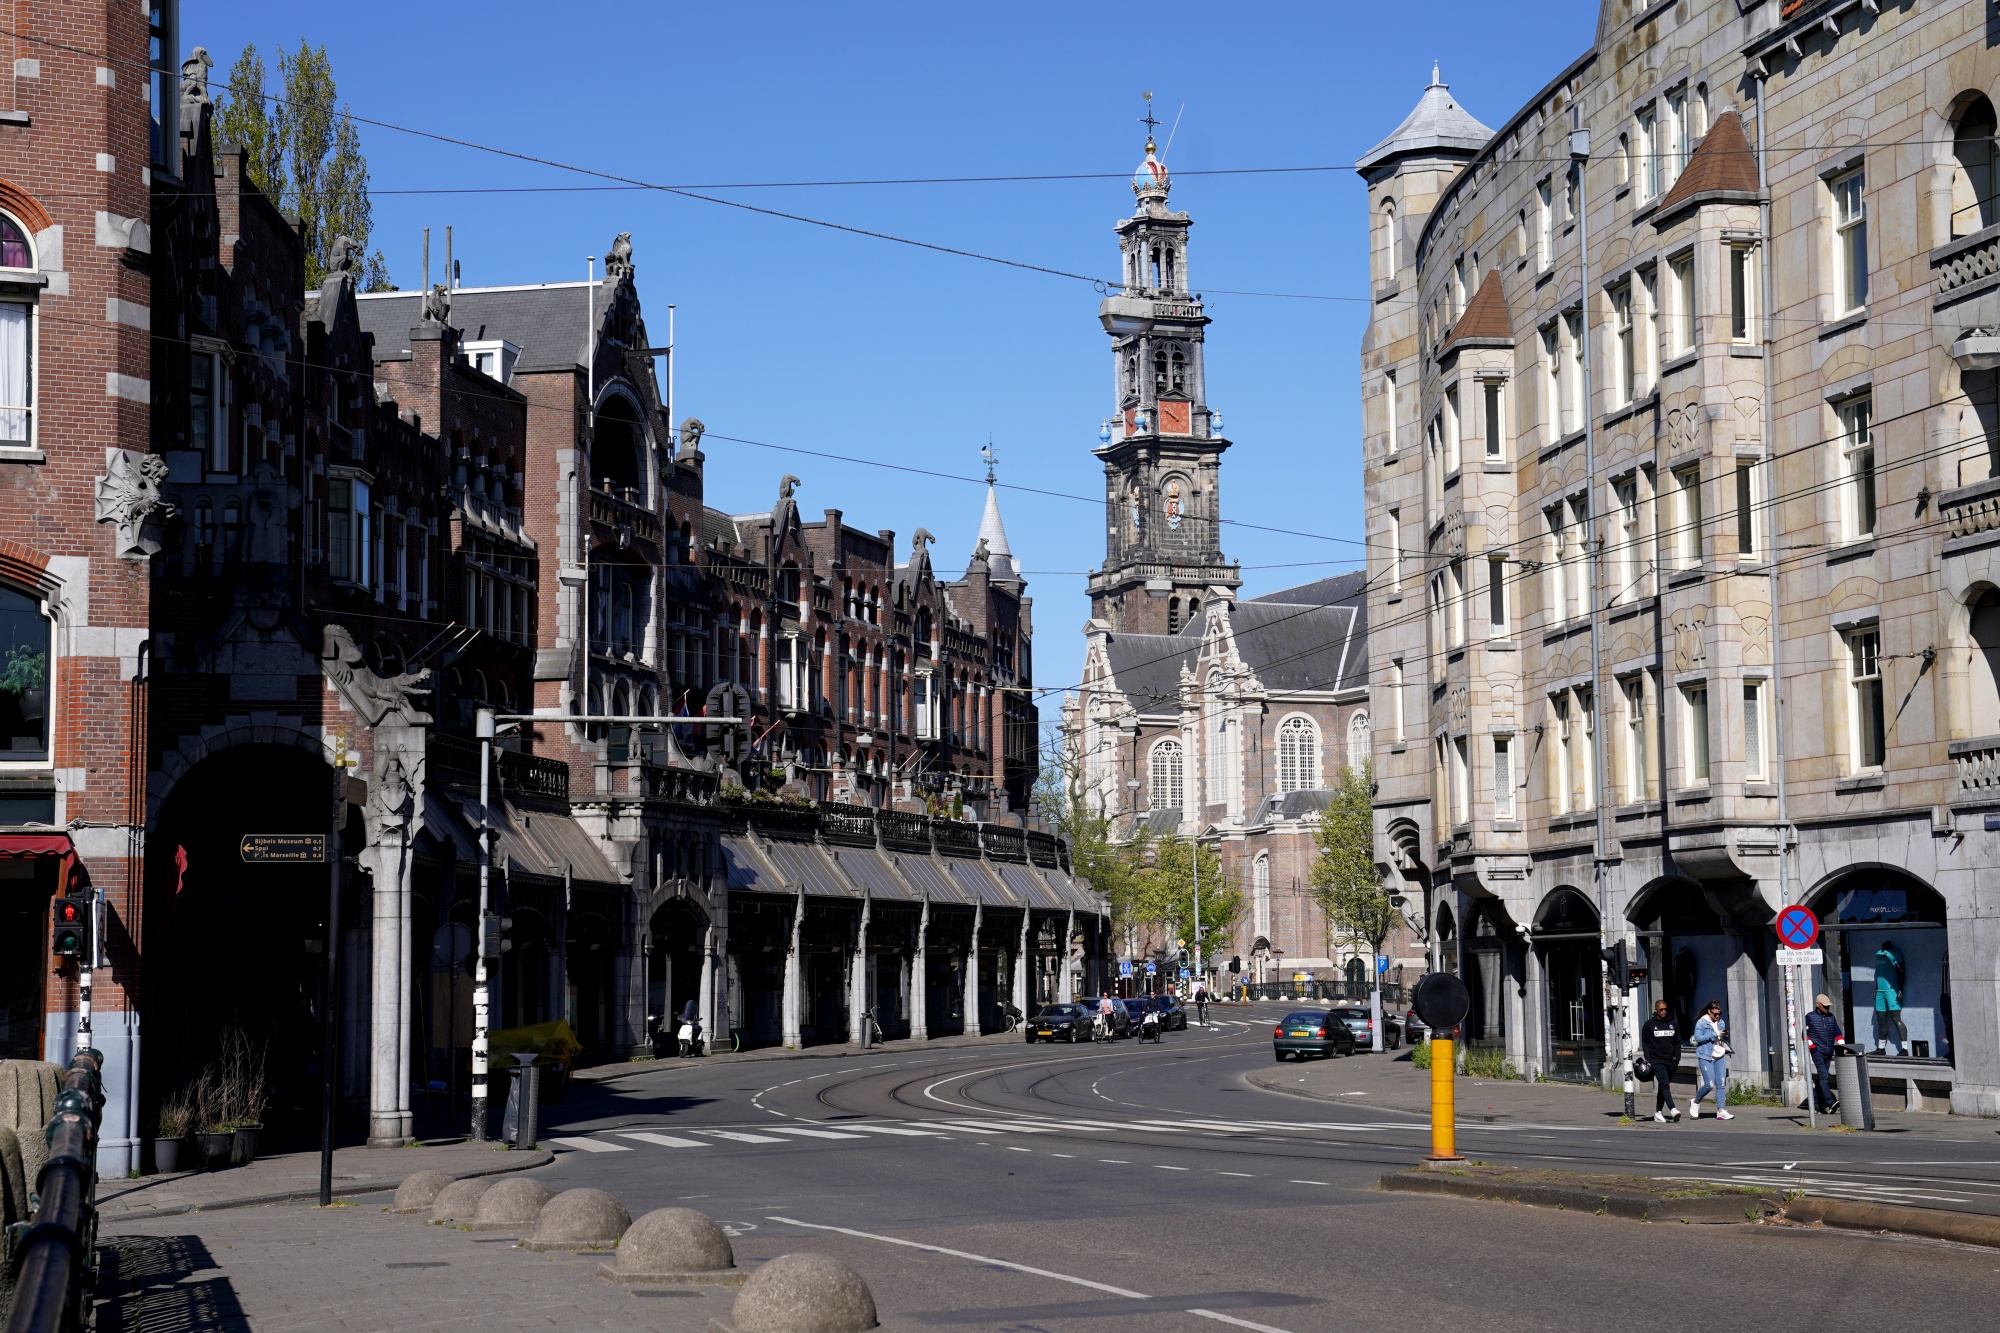 In the empty streets of Amsterdam in April, sounds like the Westerkerk church bells that once dominated the city’s soundscape could be heard more vividly again without noise pollution.&nbsp;